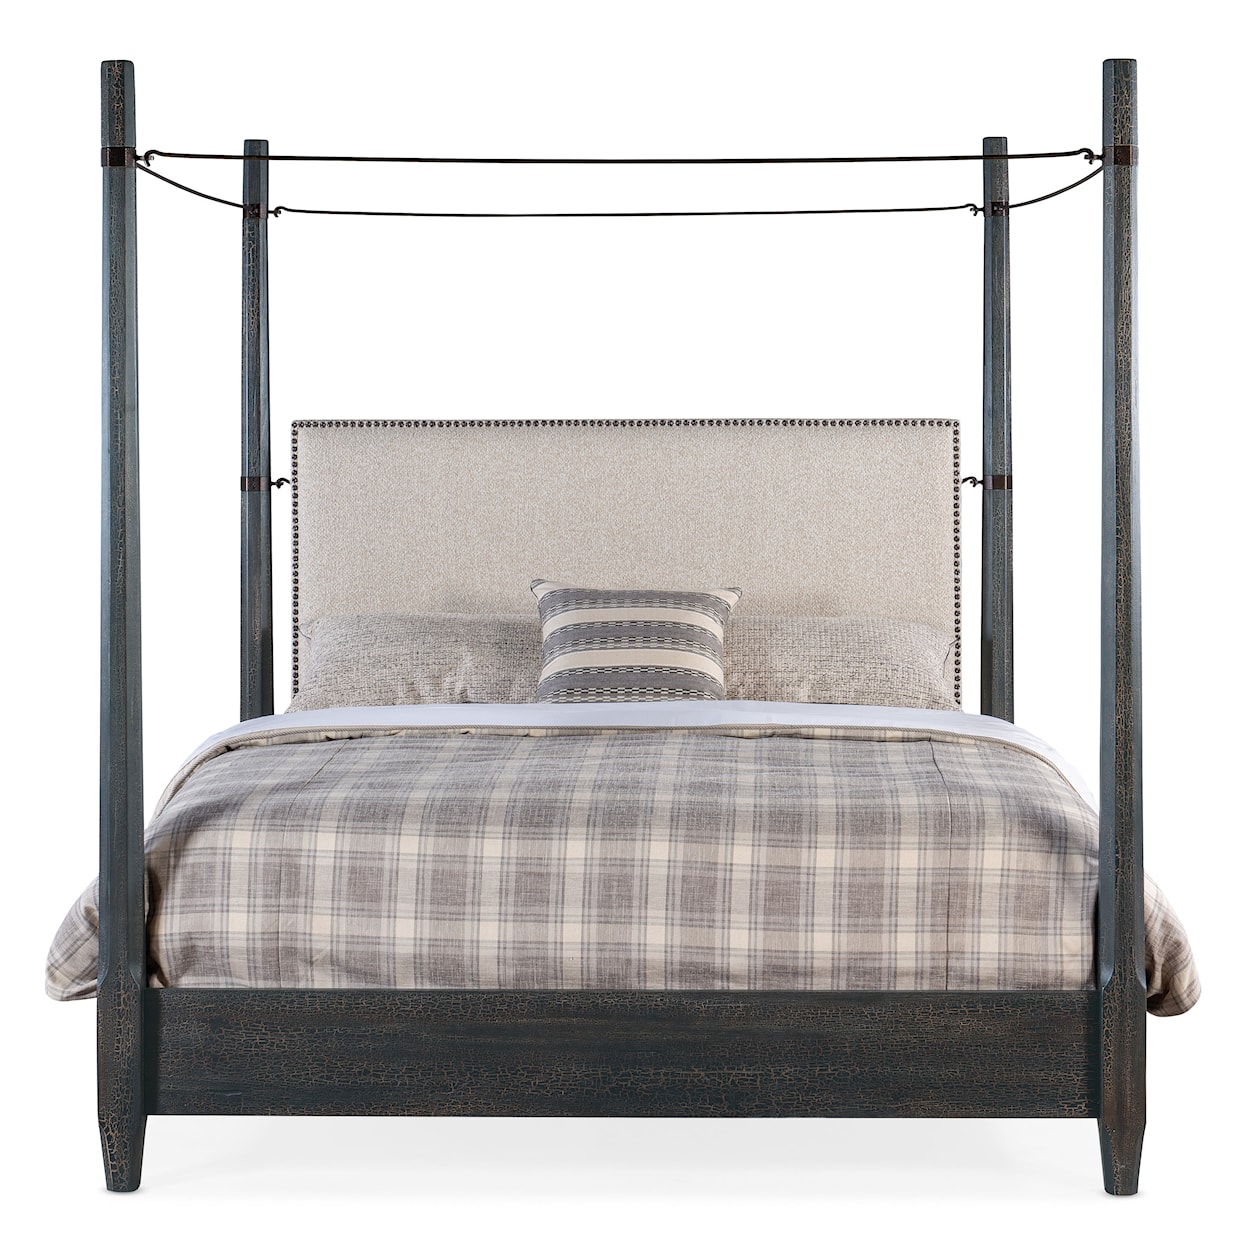 Hooker Furniture Big Sky King Poster Bed with Canopy